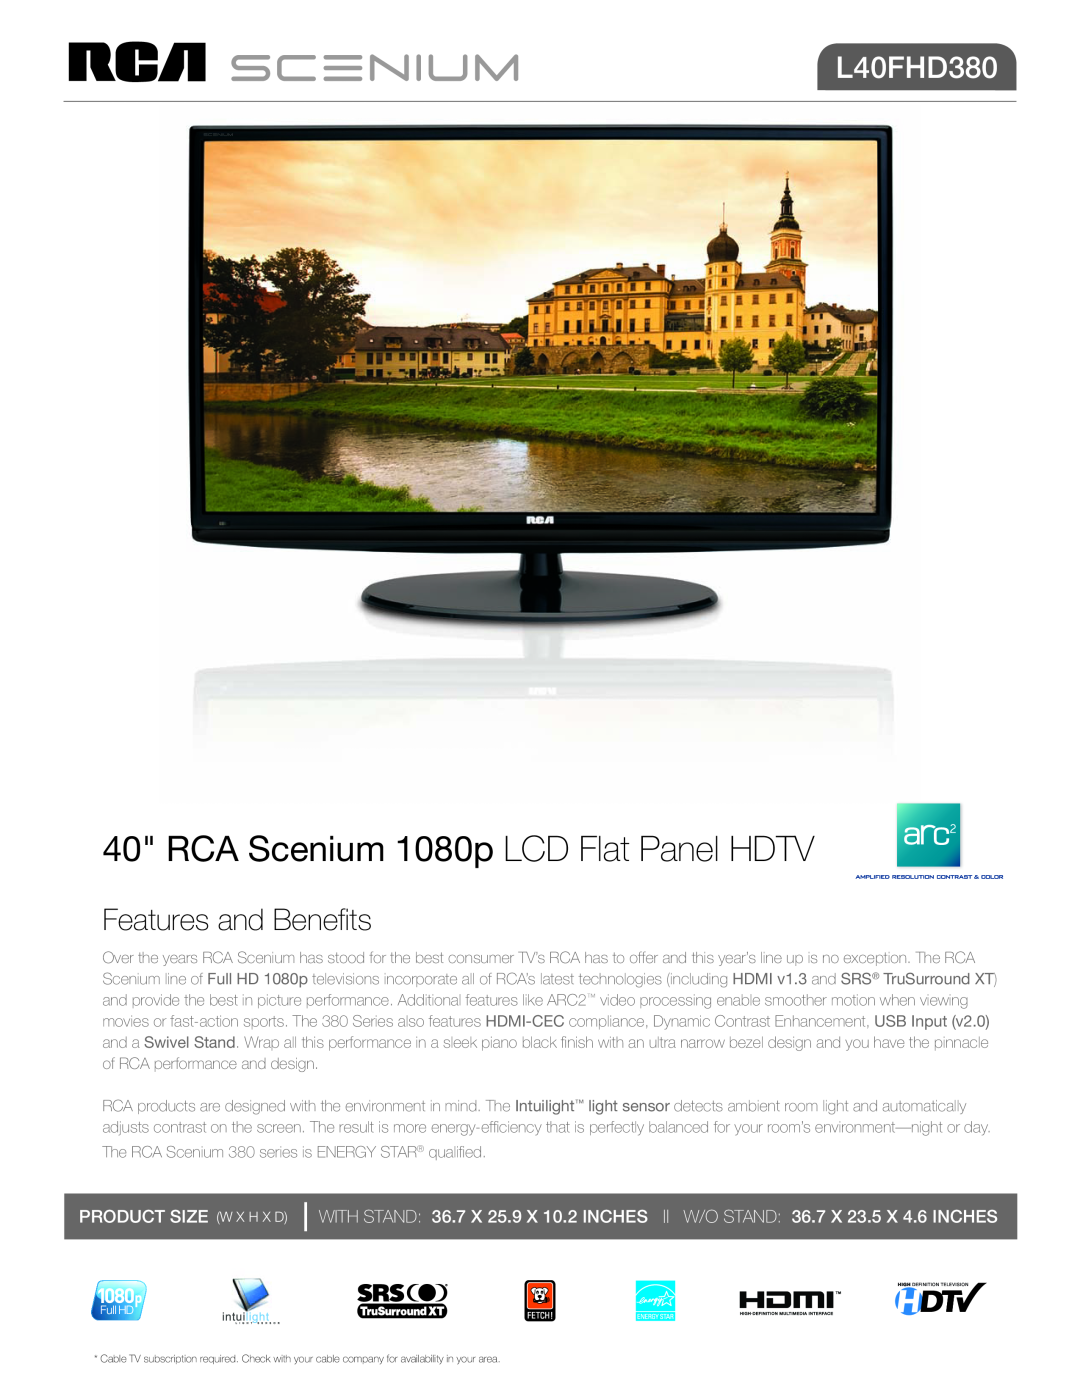 RCA L40FHD380 manual RCA Scenium 1080p LCD Flat Panel HDTV, Features and Benefits, Product Size W x H x D 